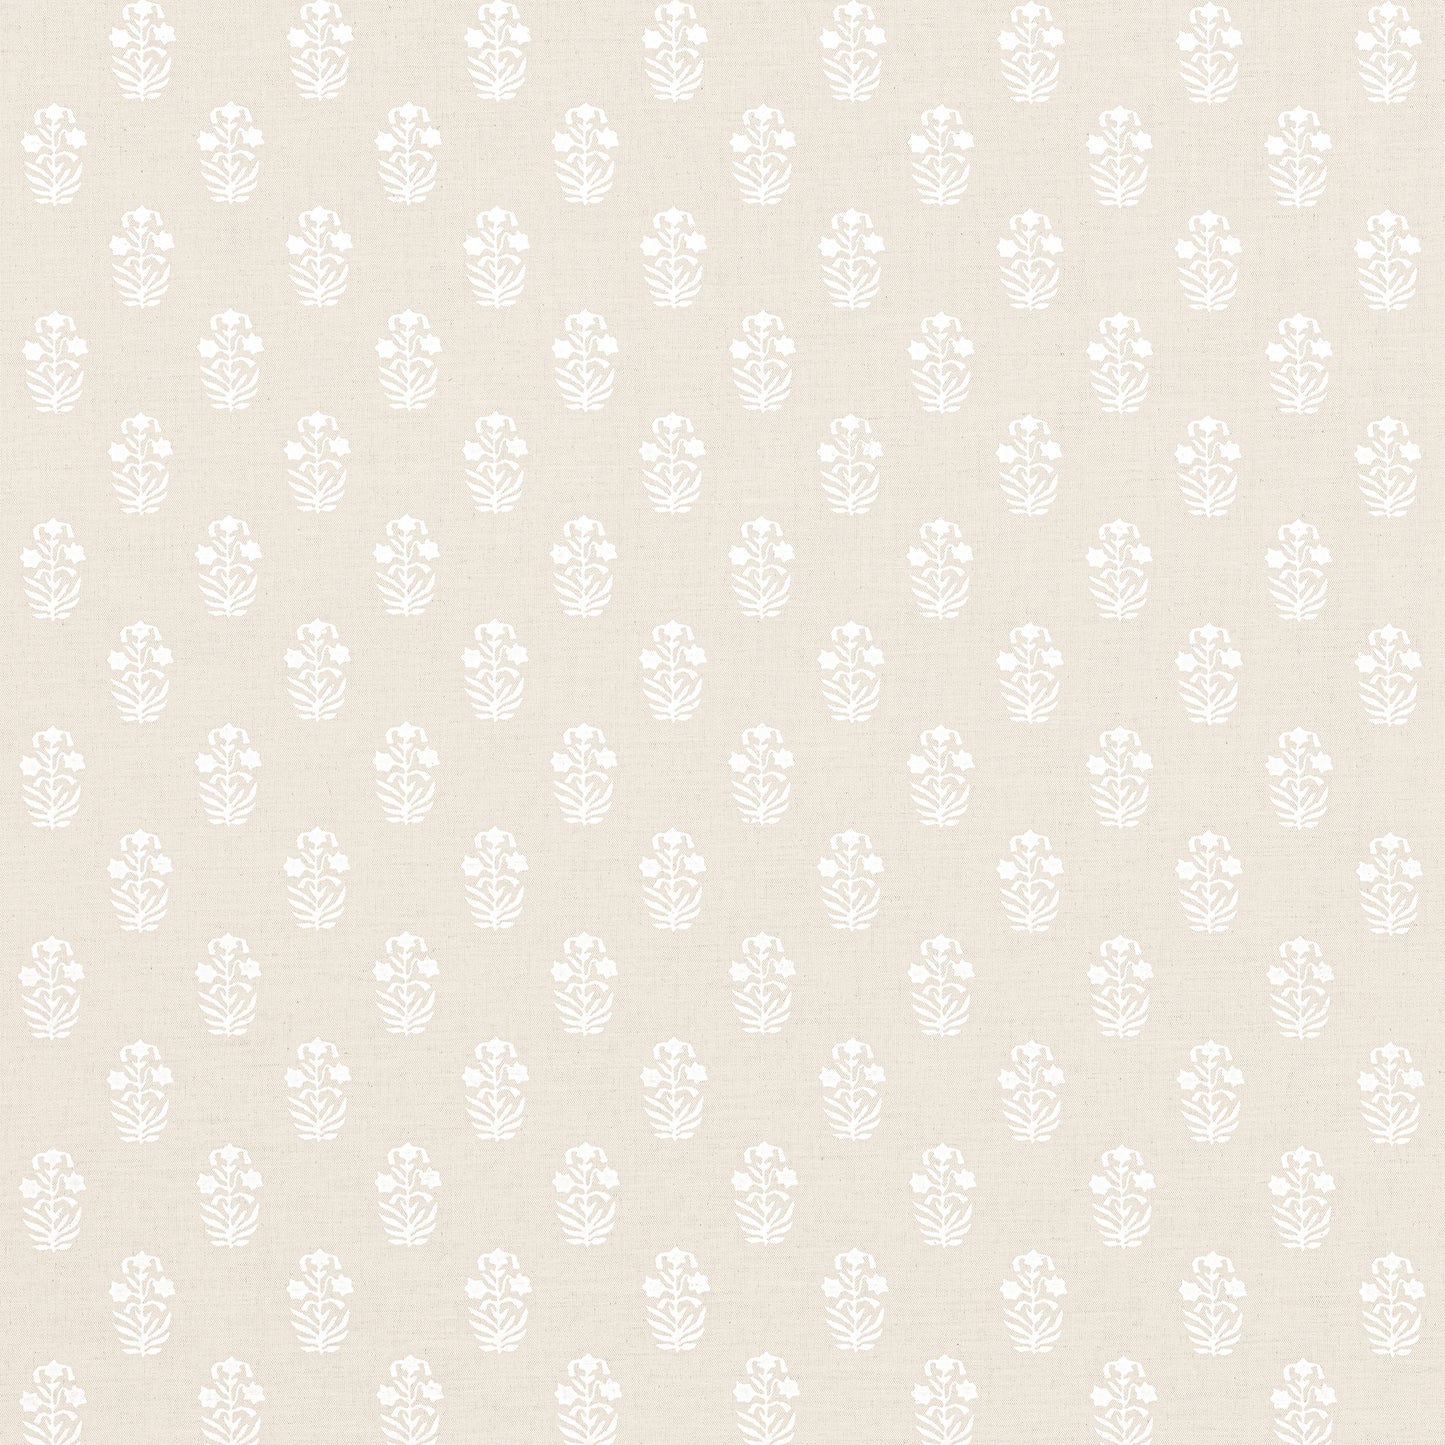 Purchase Thibaut Fabric SKU# F936405 pattern name Corwin color White on Natural